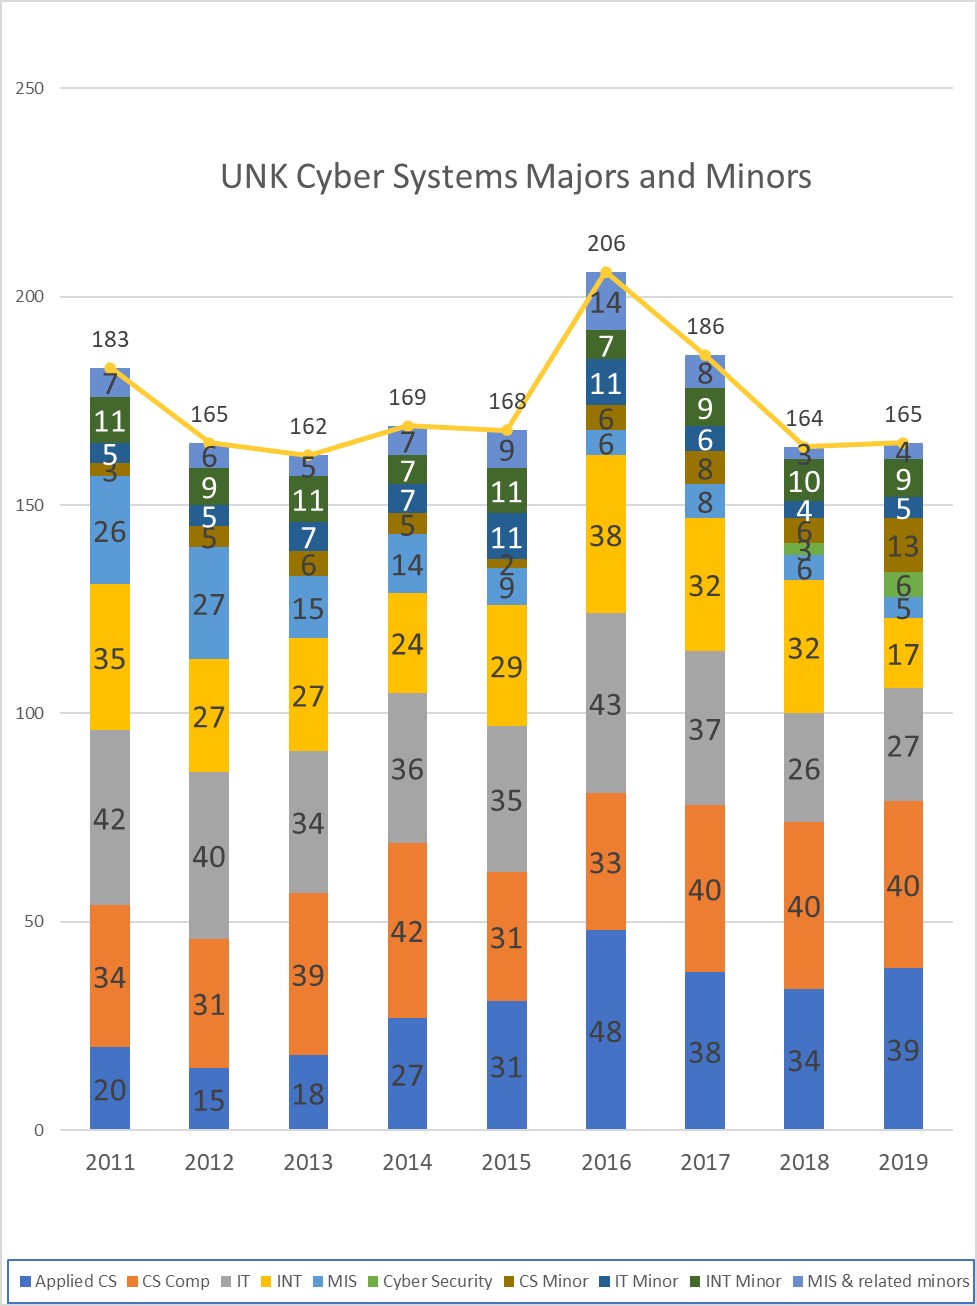 Cyber Systems Majors and Minors